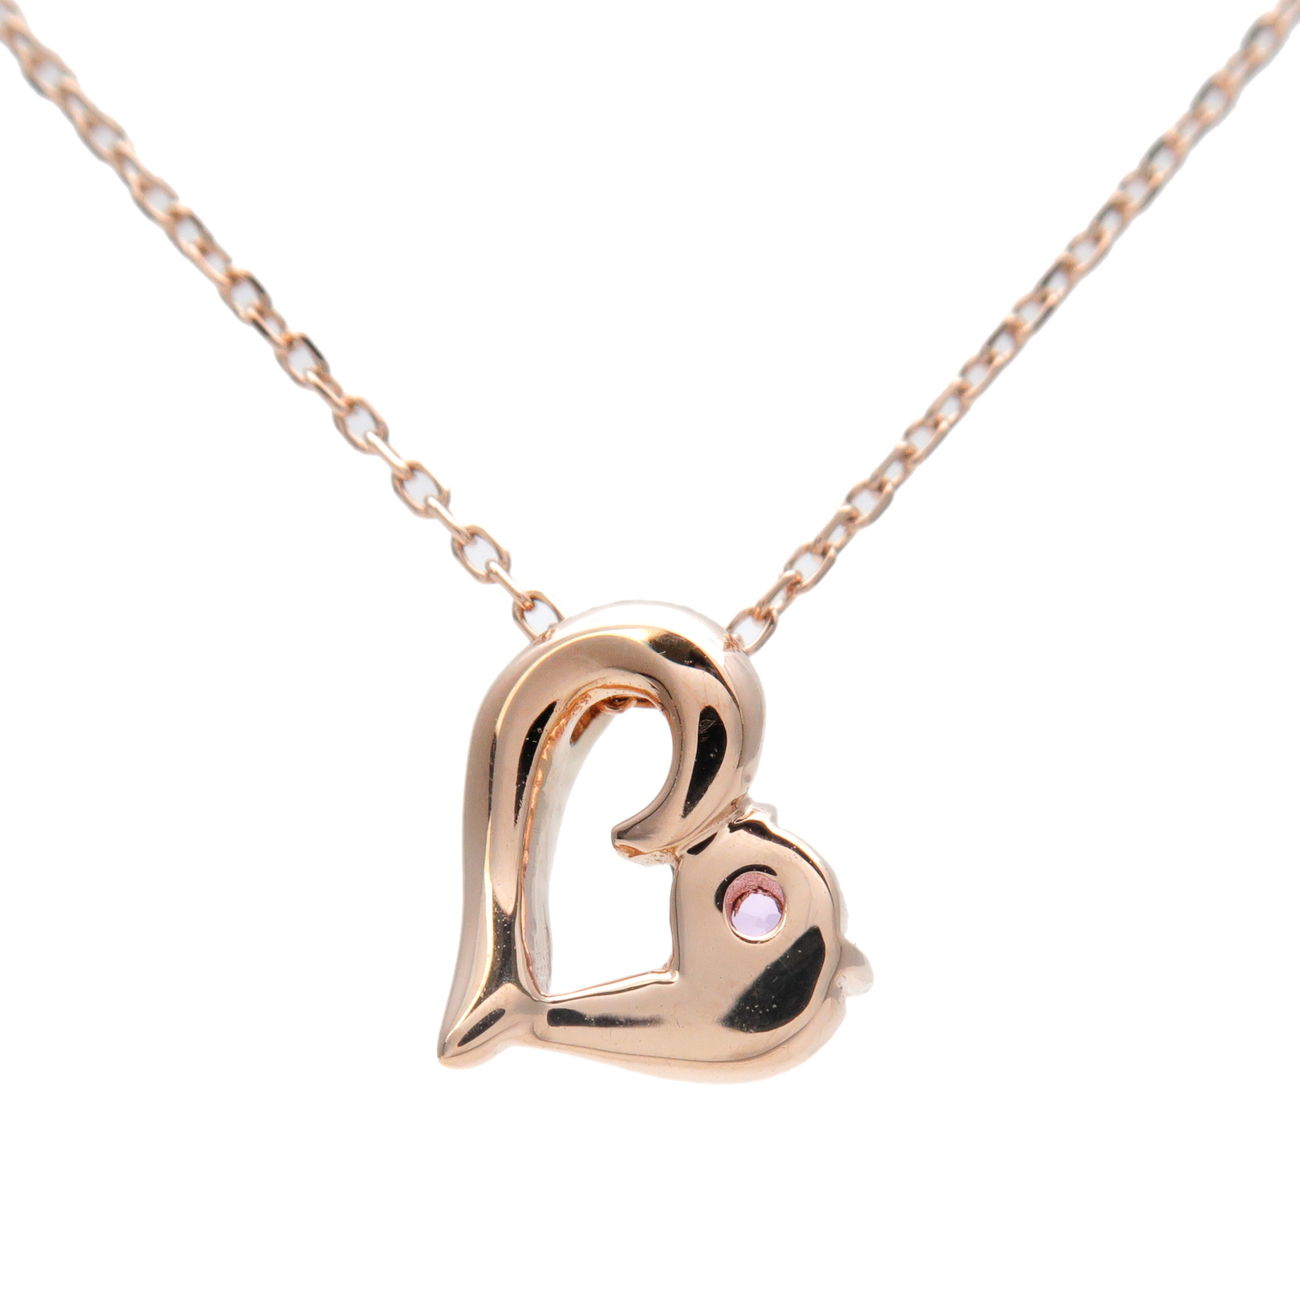 4C Heart 1P Pink Sapphire Necklace K18PG 750PG Rose Gold